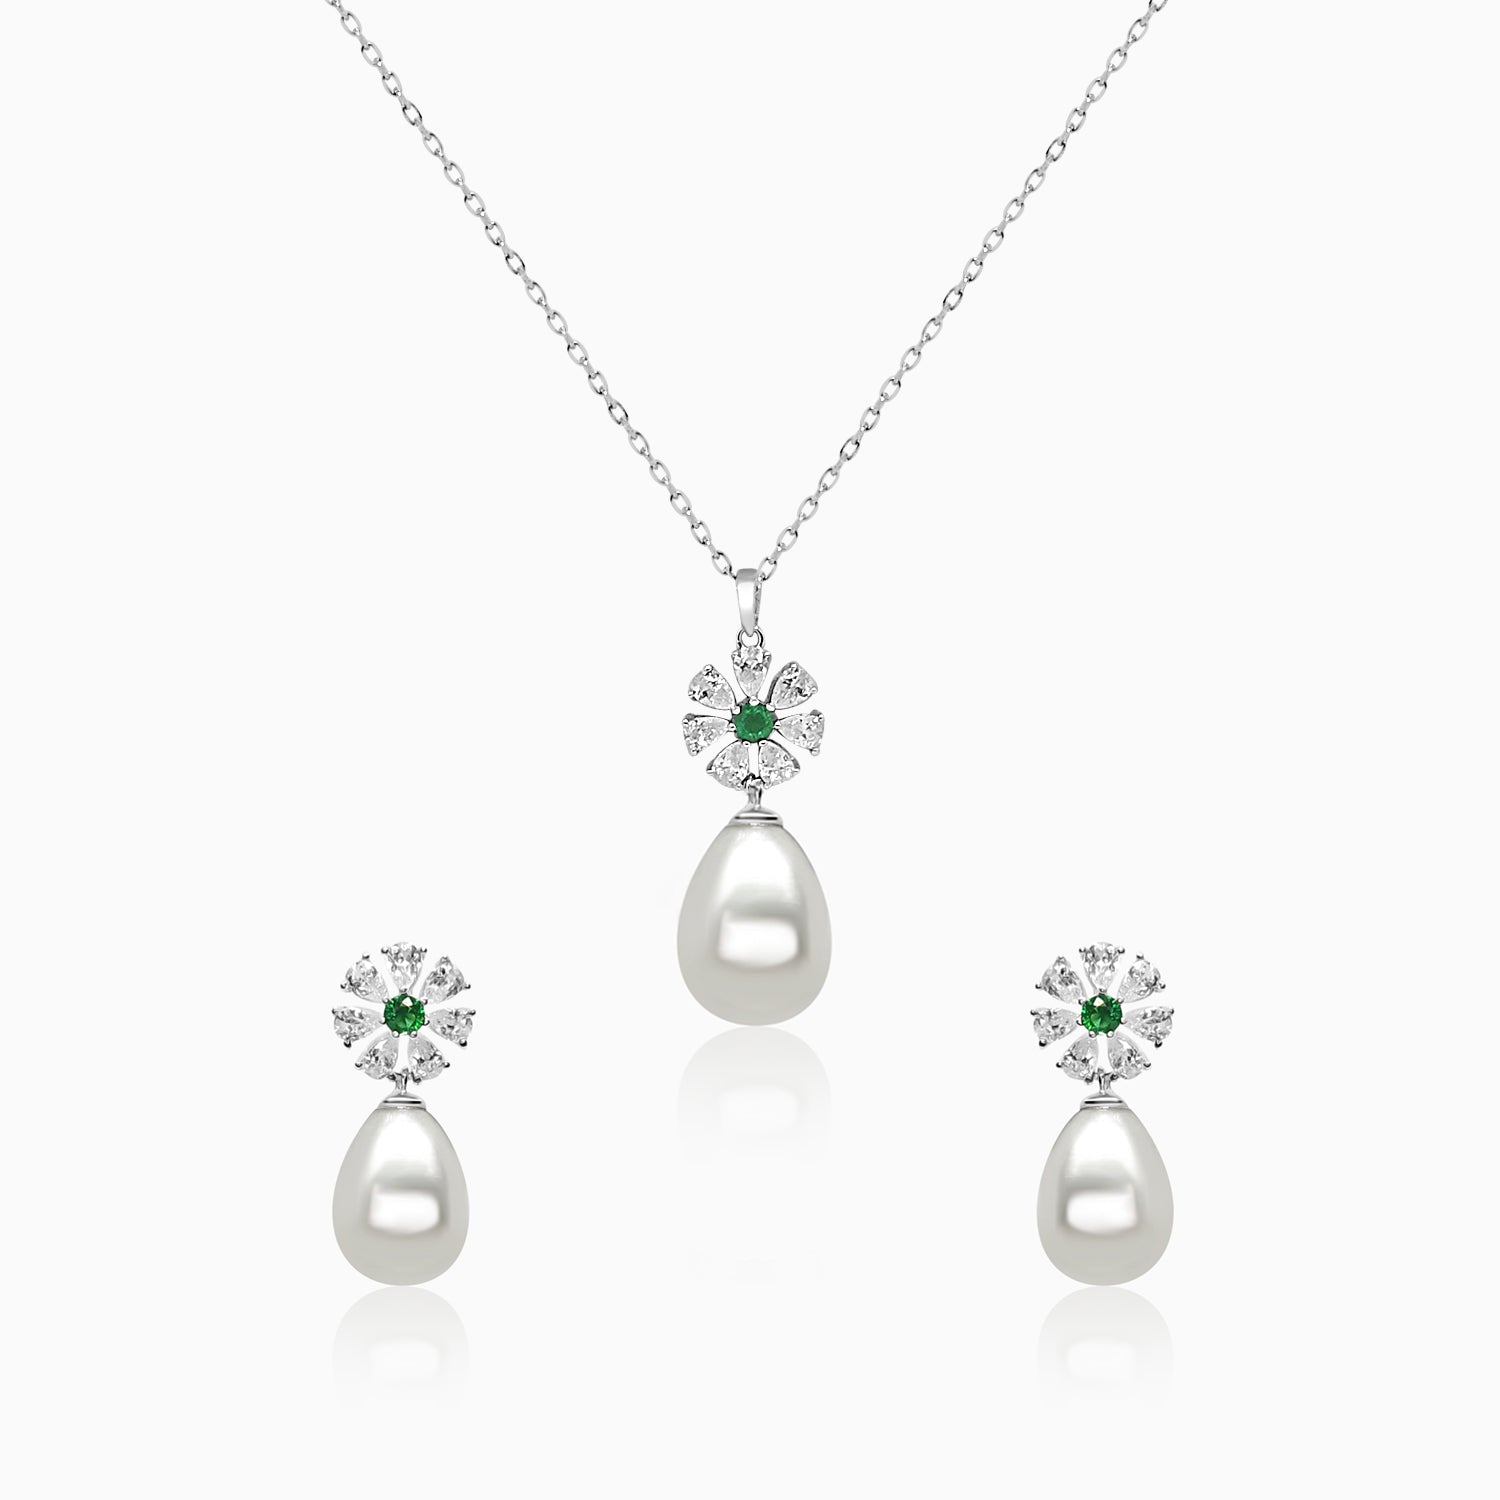 Silver Dangling Emerald and Pearl Flower Necklace Set